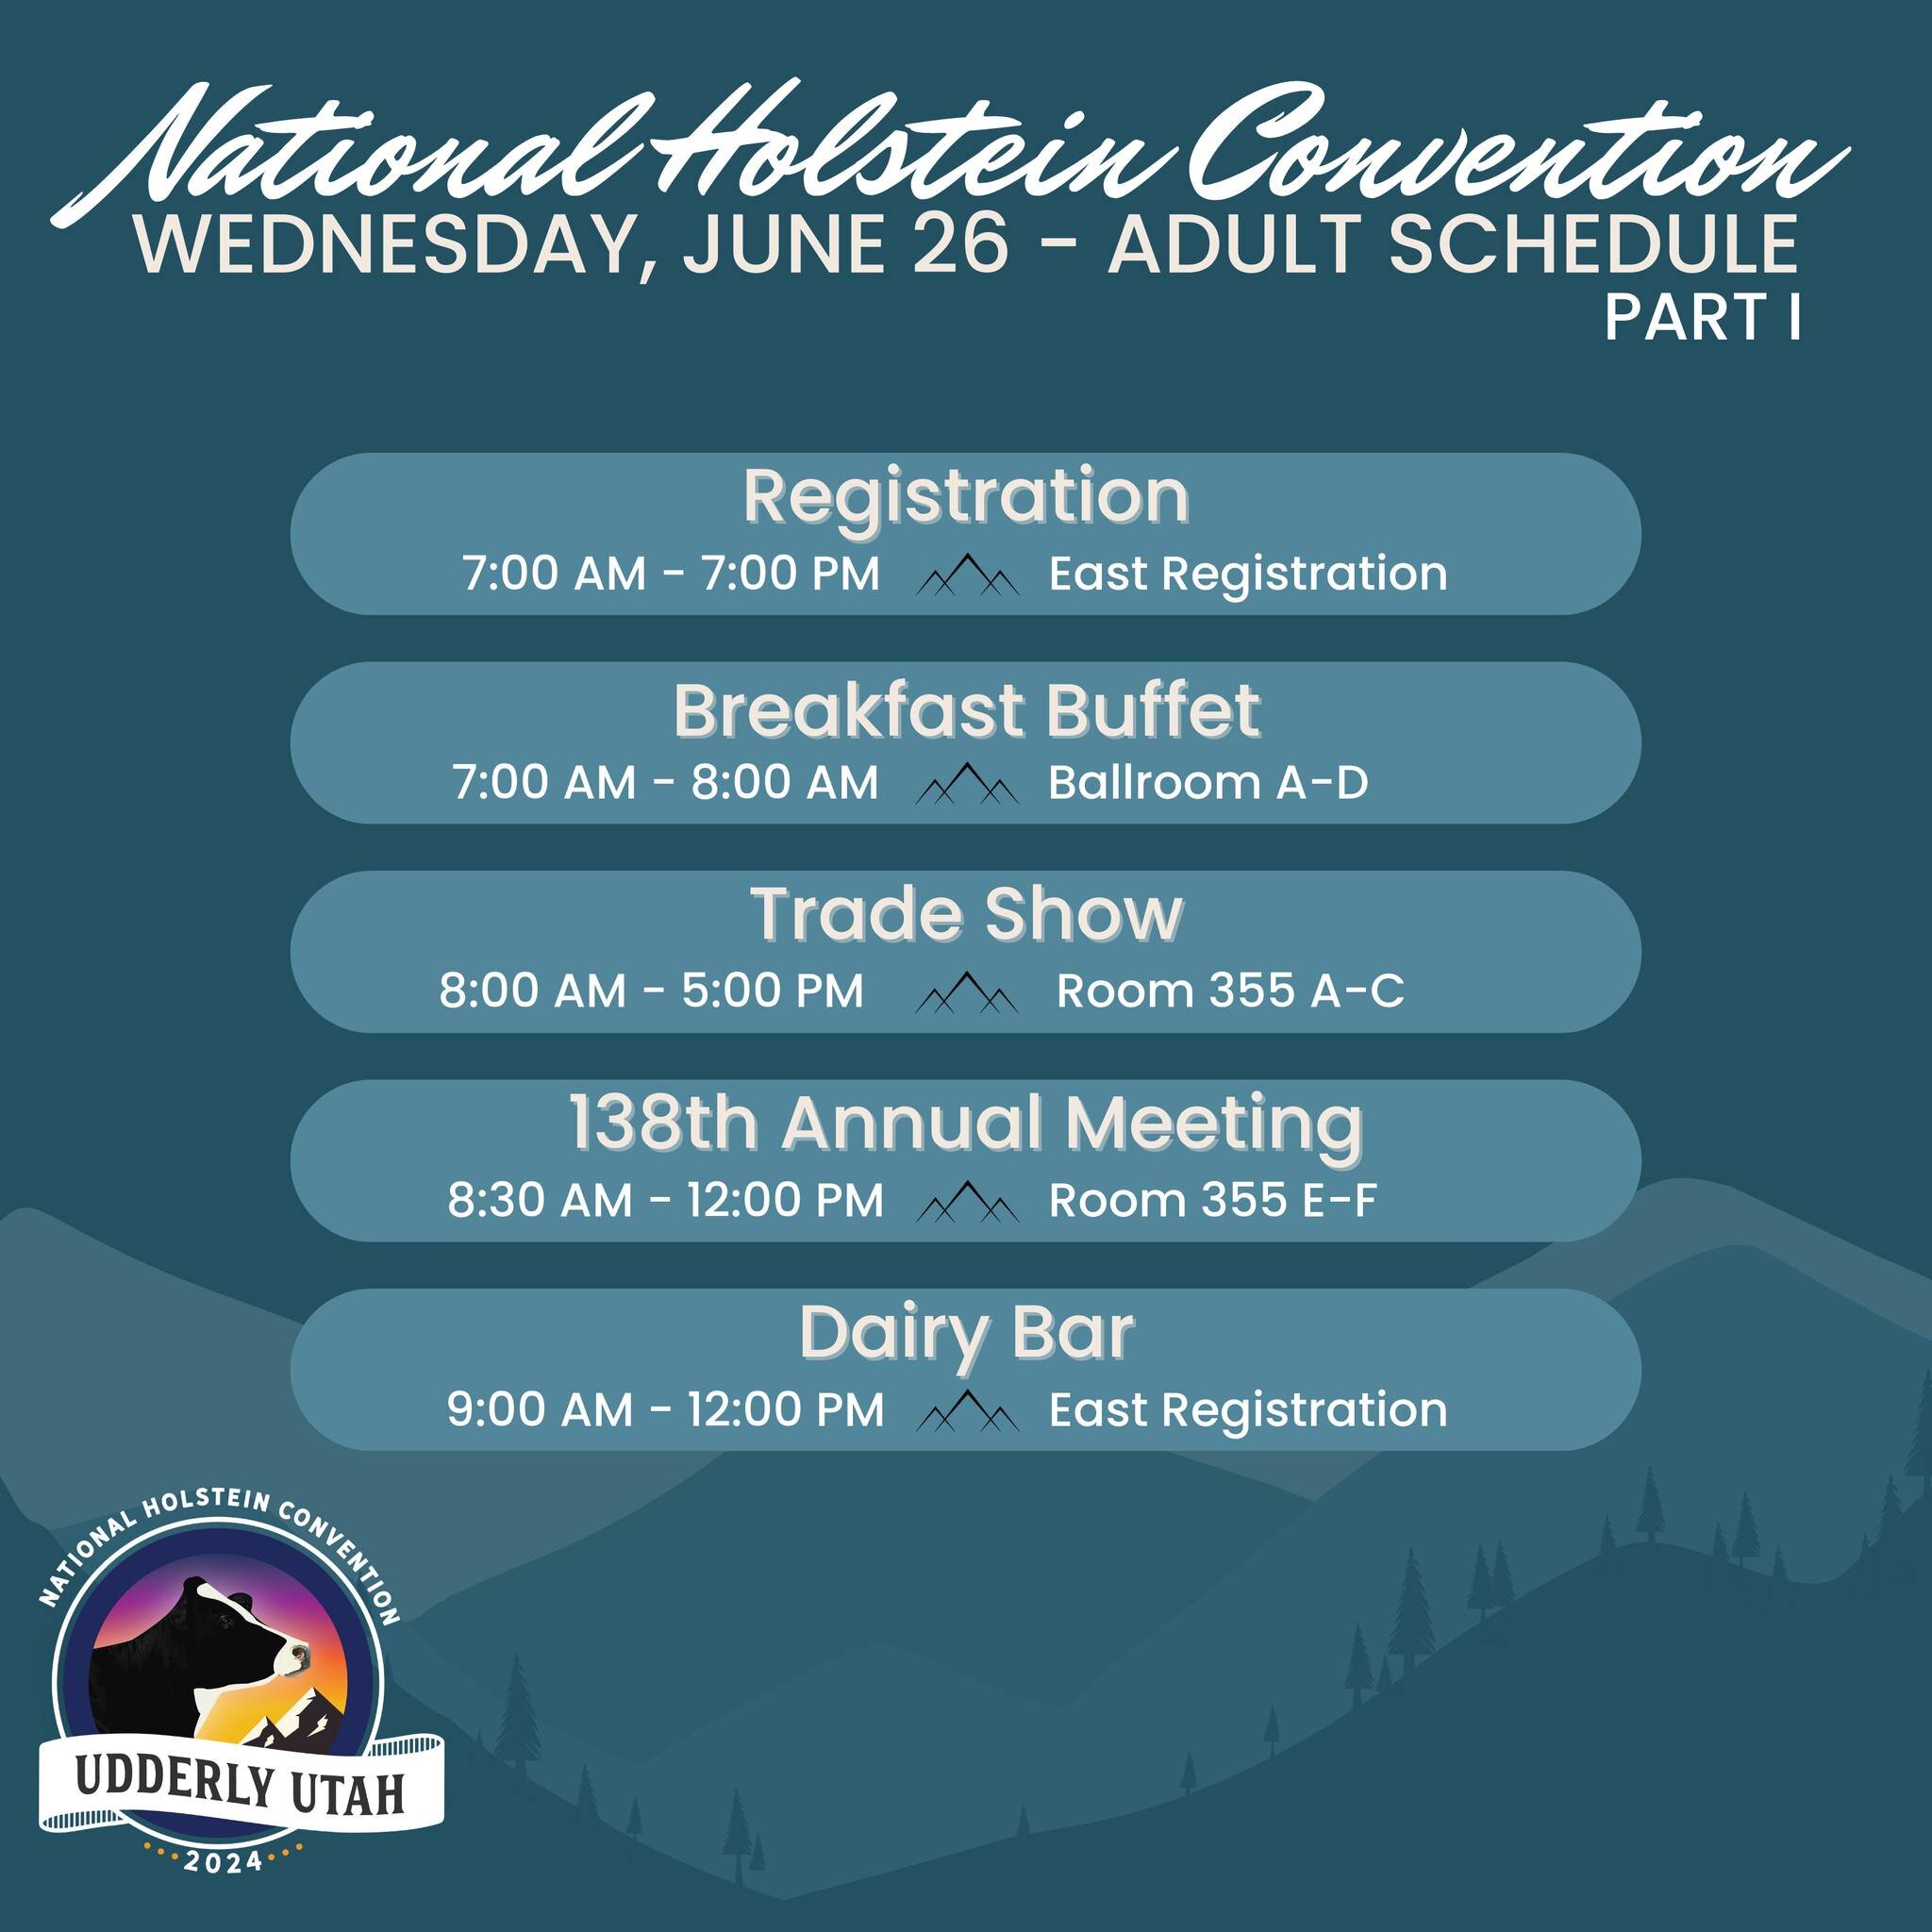 There are 139 days until we welcome you to the National Holstein Convention in Salt Lake City, Utah! 🏔️🐄

Here's a look at the schedule for the third day of convention. 👀 Start planning your trip now using the full schedule available on our websit